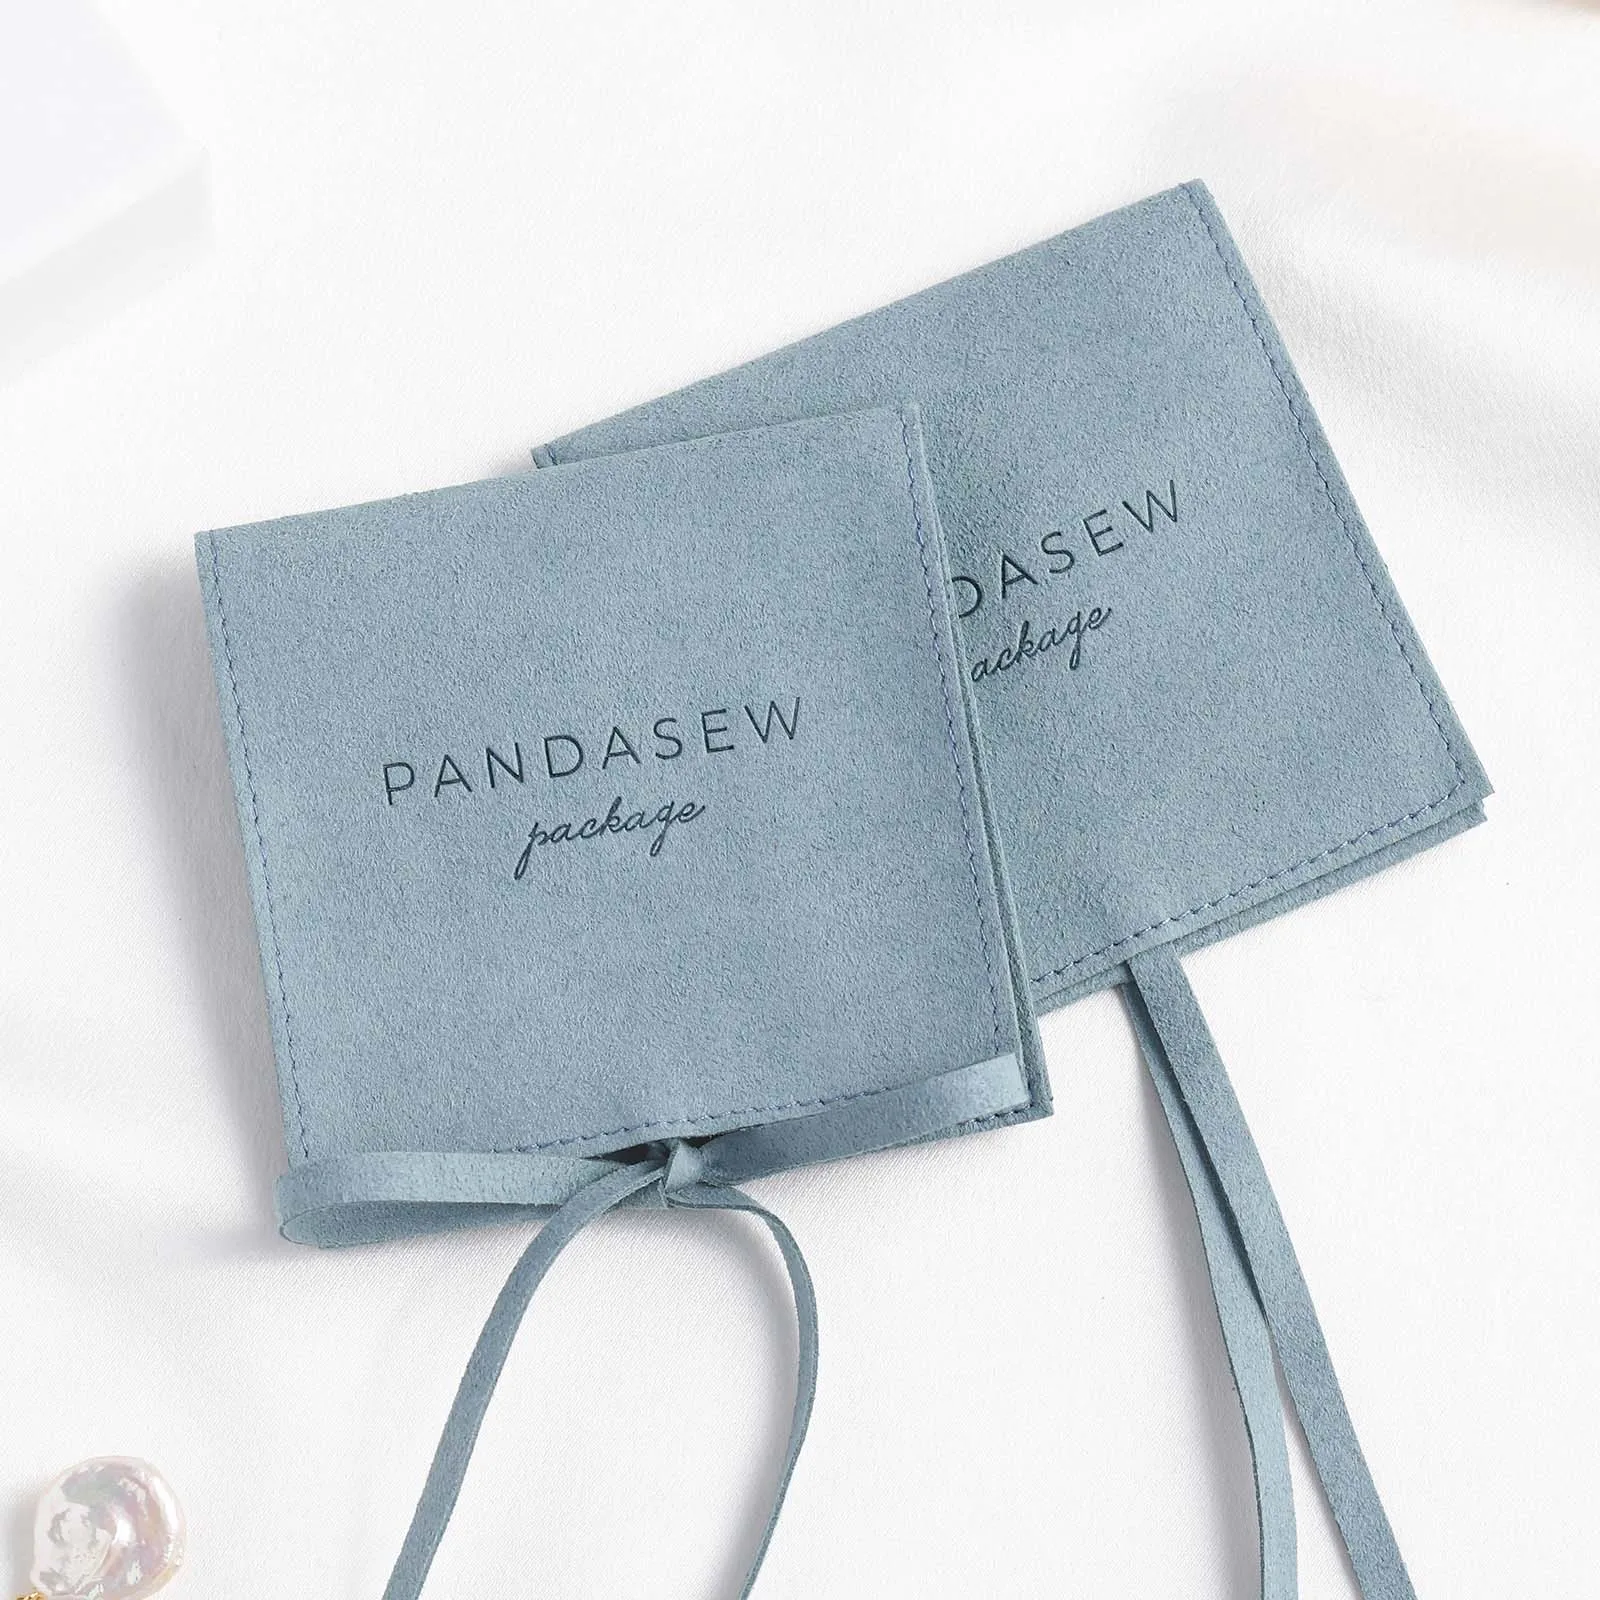 

PandaSew Custom Logo Suede Microfiber Jewelry Packaging & Display Fashion Gift Jewelry Pouch, Accept customized color